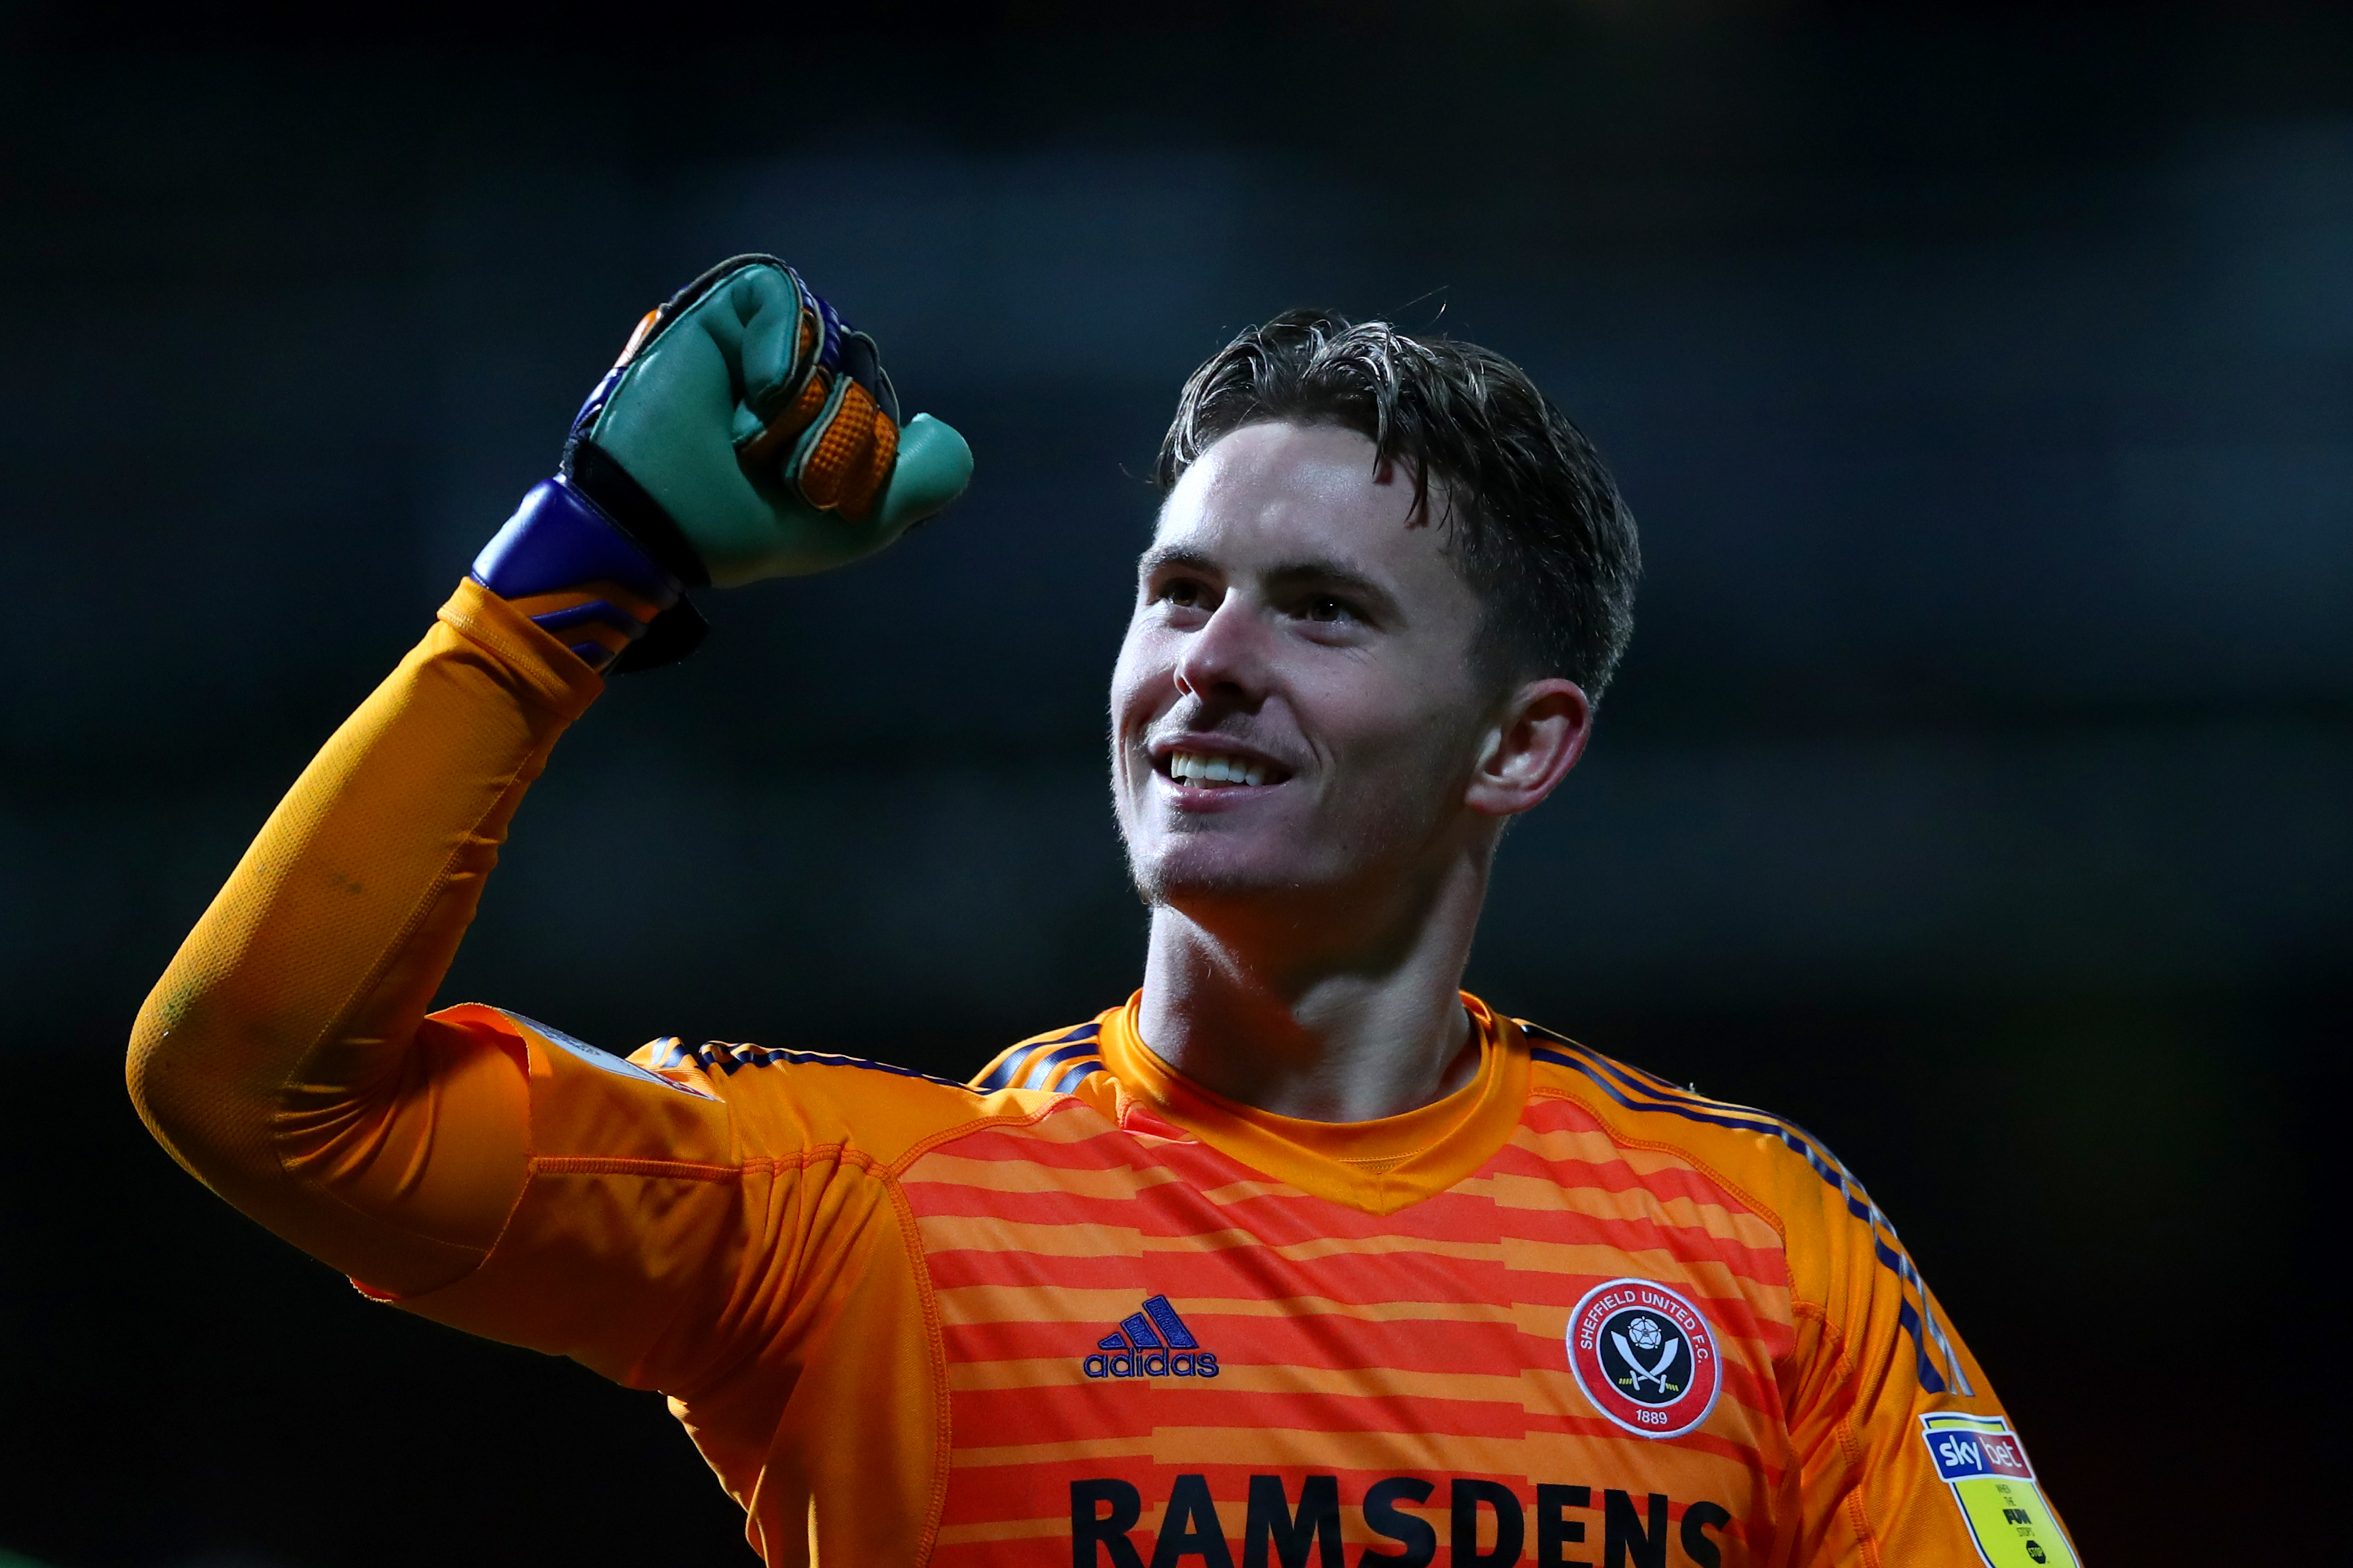 BRENTFORD, ENGLAND - NOVEMBER 27:  Dean Henderson of Sheffield United celebrates victory in front of the fans after the Sky Bet Championship match between Brentford and Sheffield United at Griffin Park on November 27, 2018 in Brentford, England. (Photo by Dan Istitene/Getty Images)